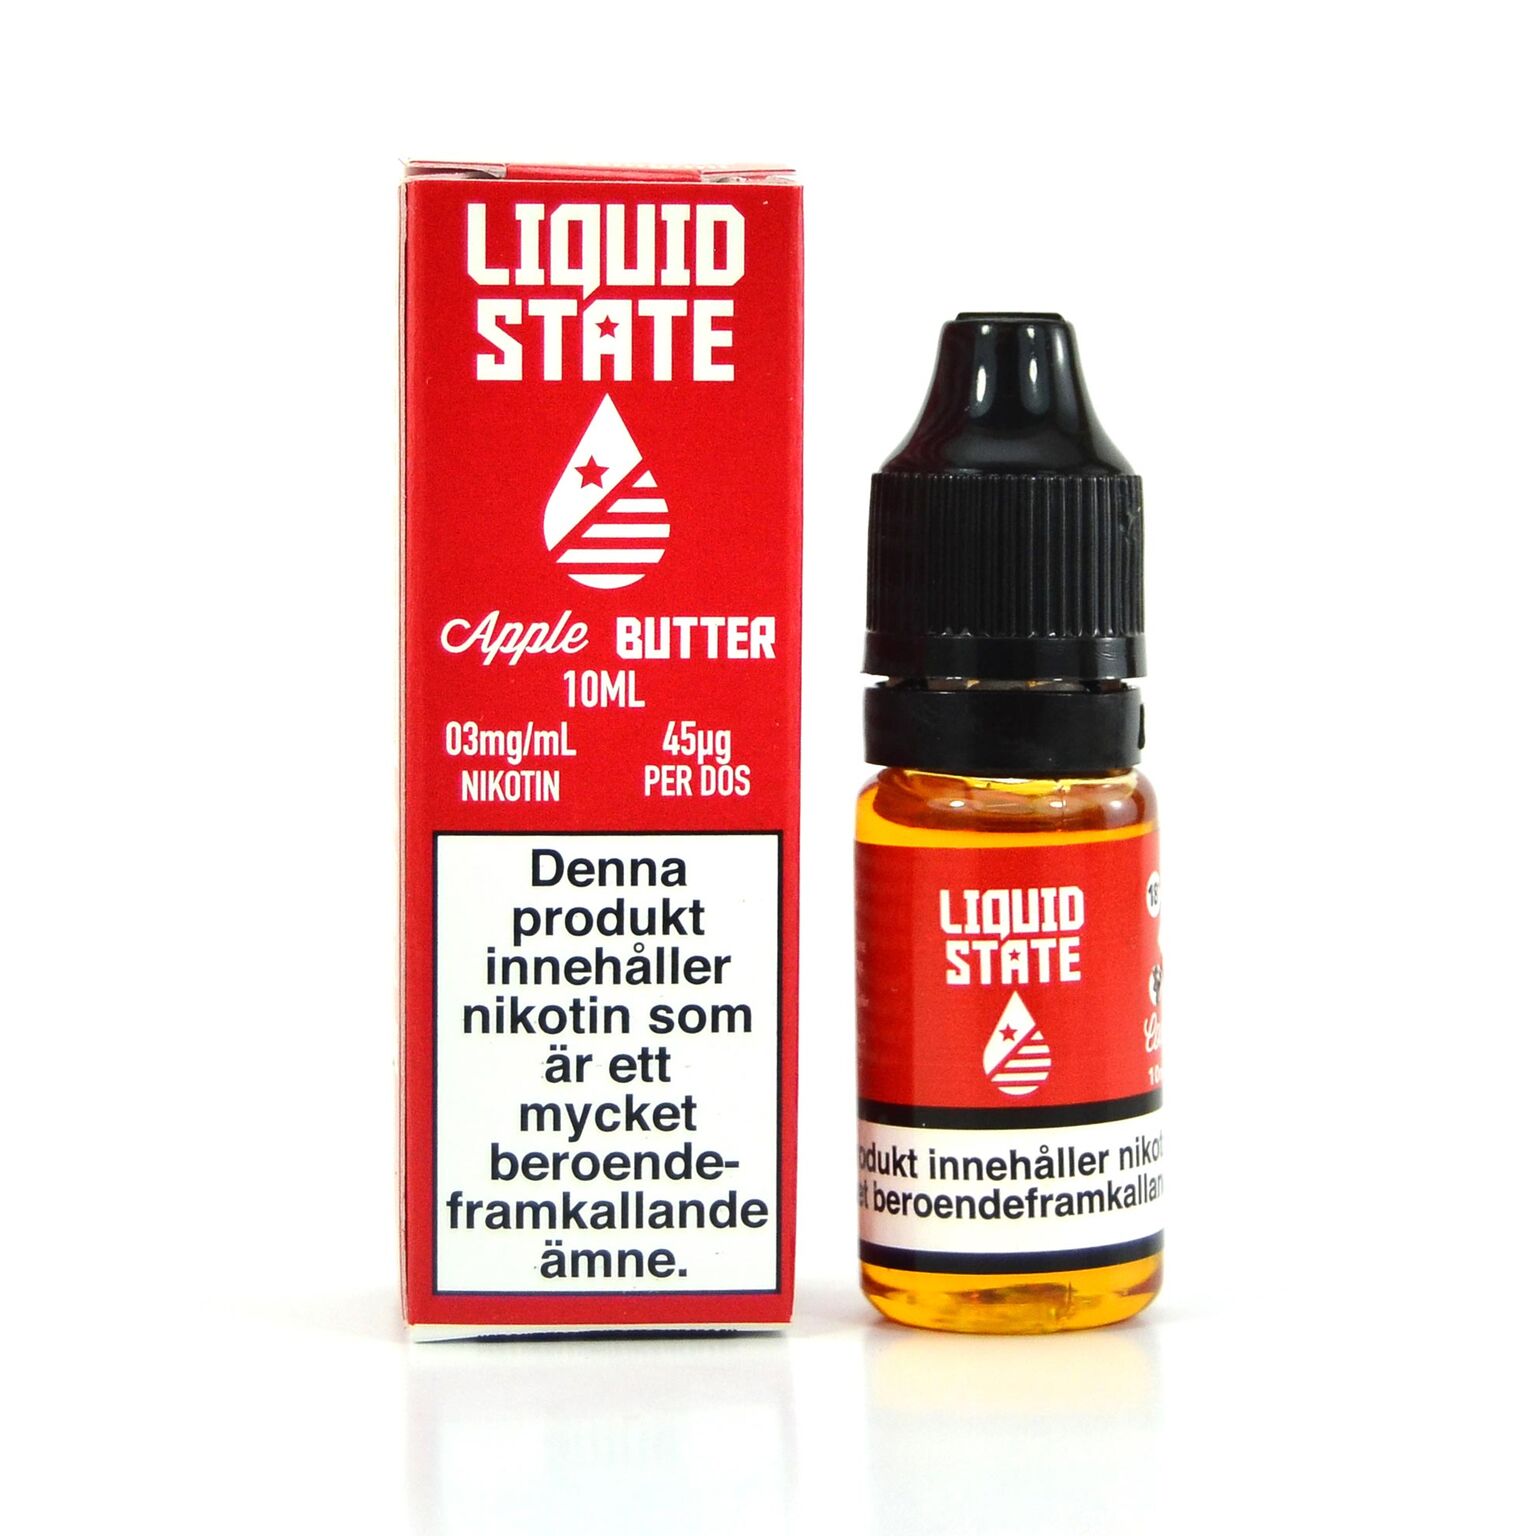 Liquid State Apple Butter e-liquid with nicotine